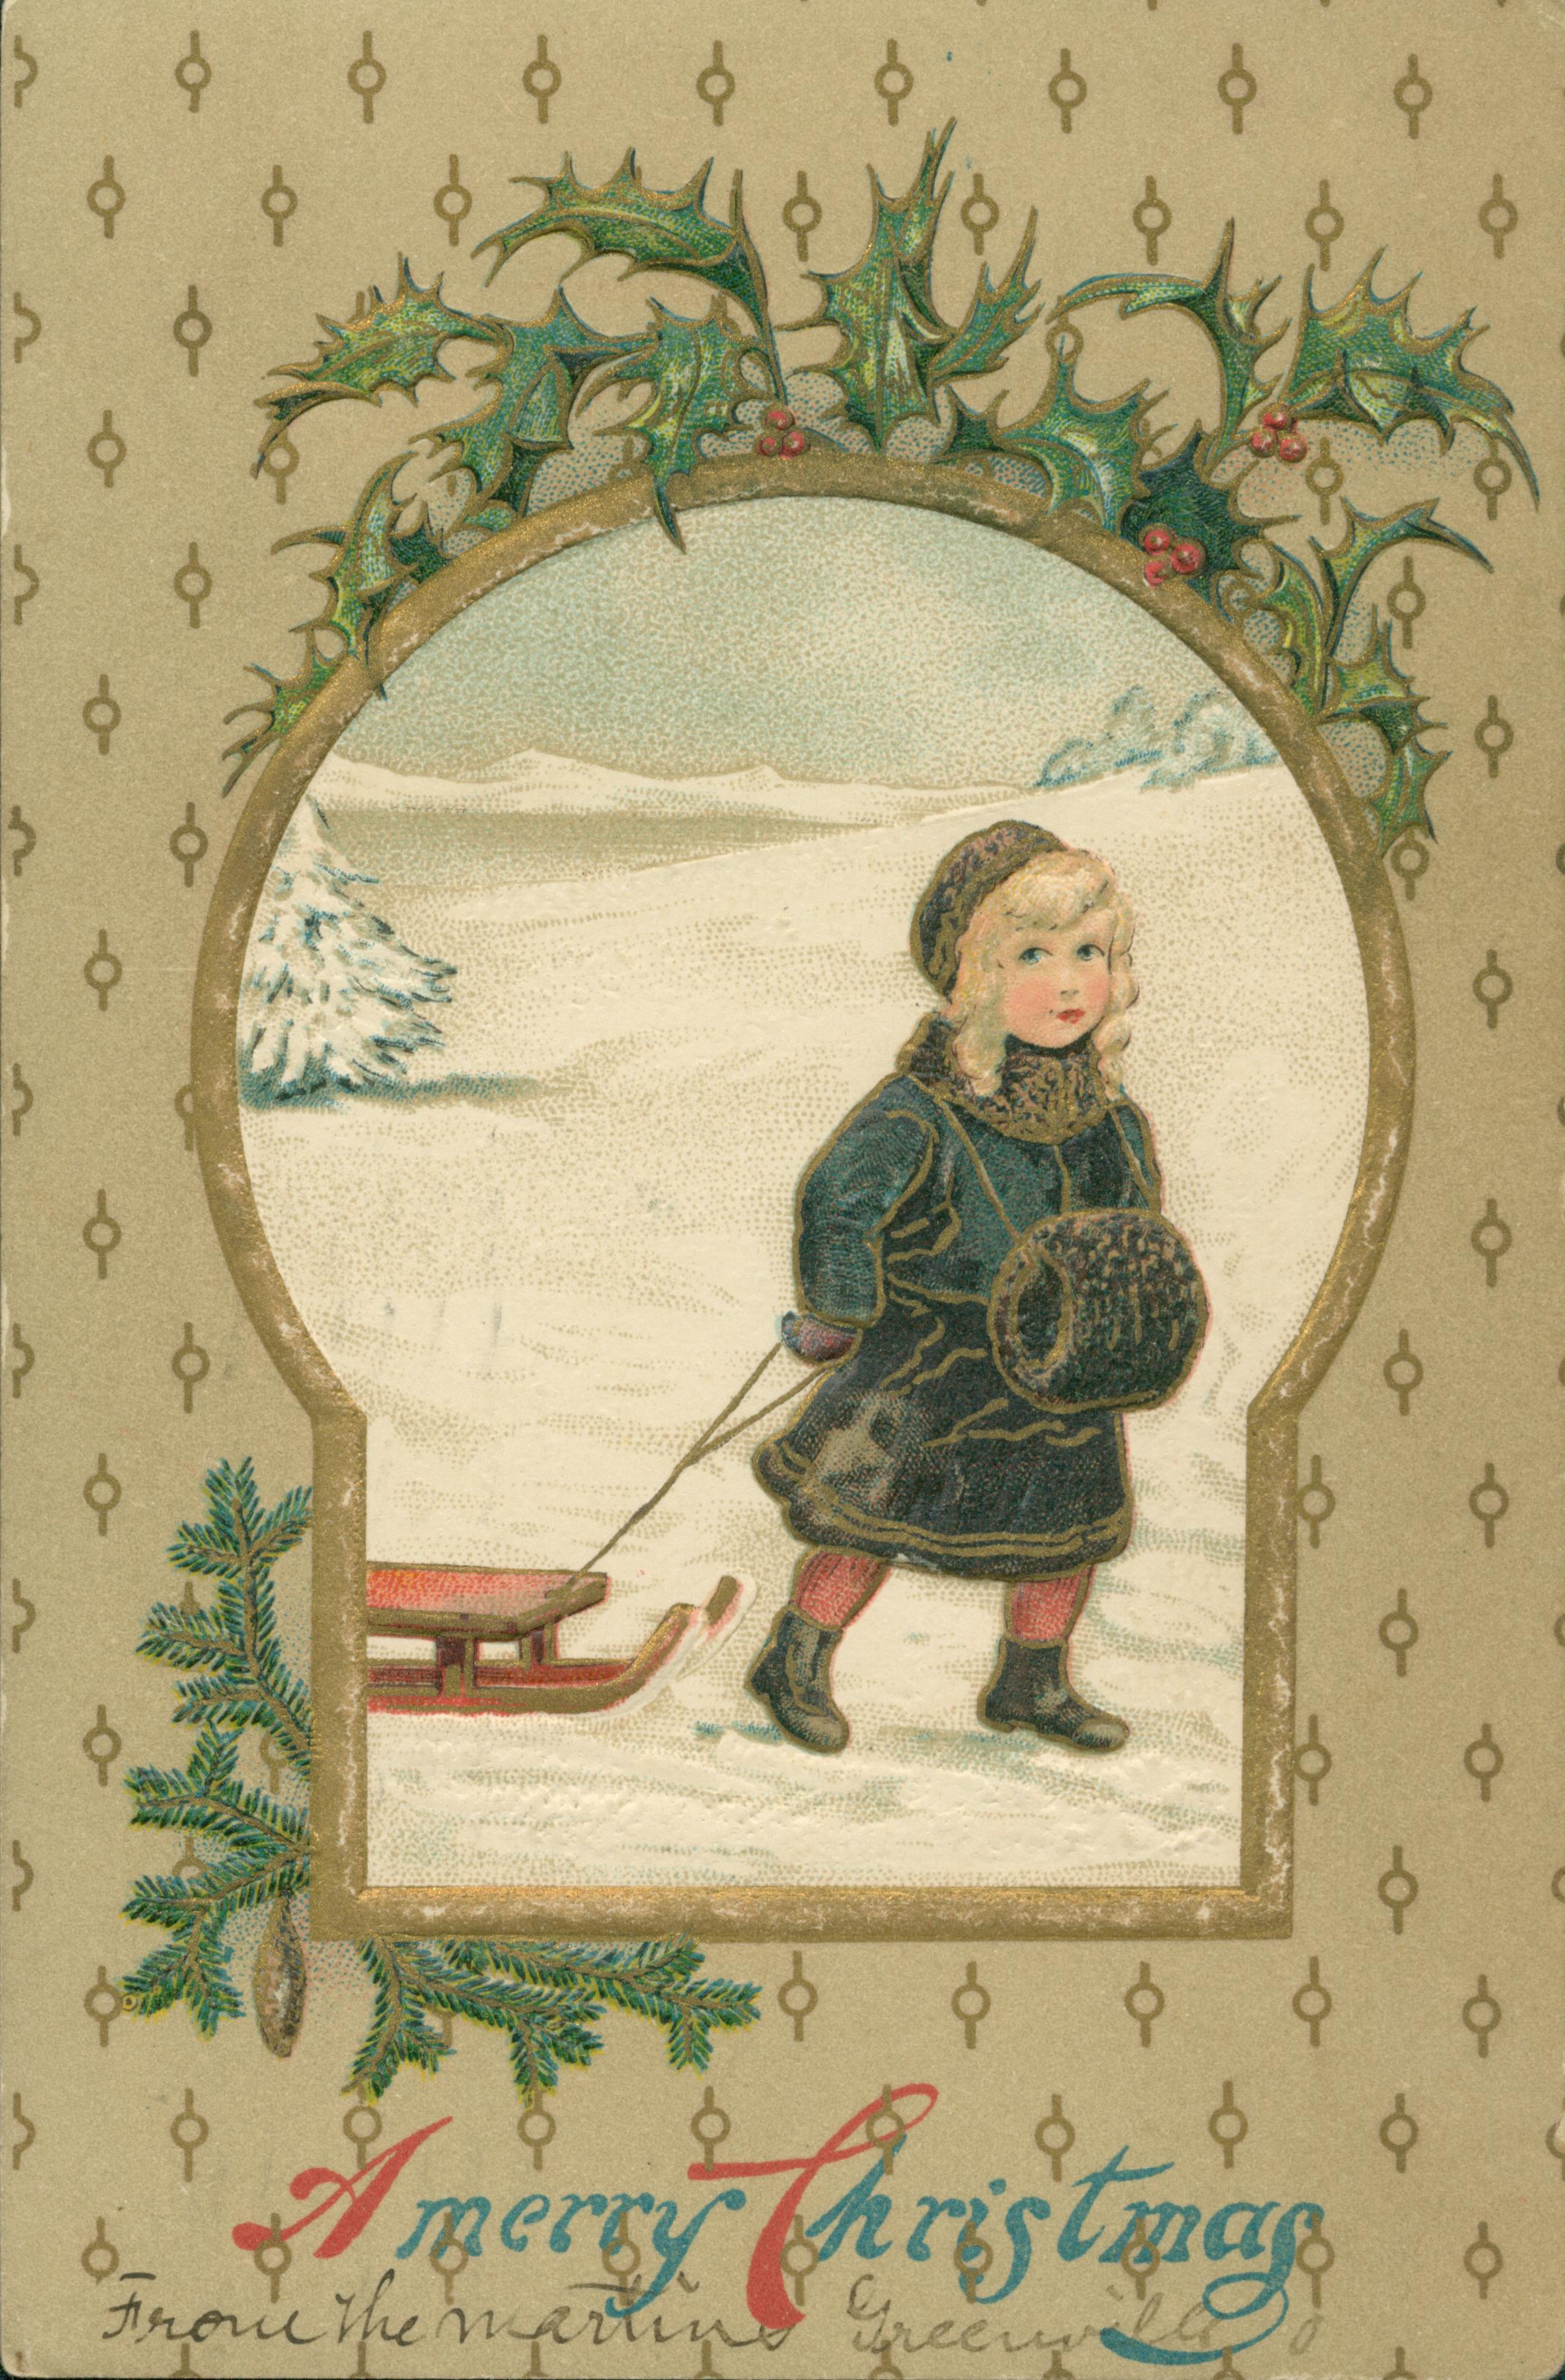 Shows a girl pulling a sleigh in a keyhole shaped vignette